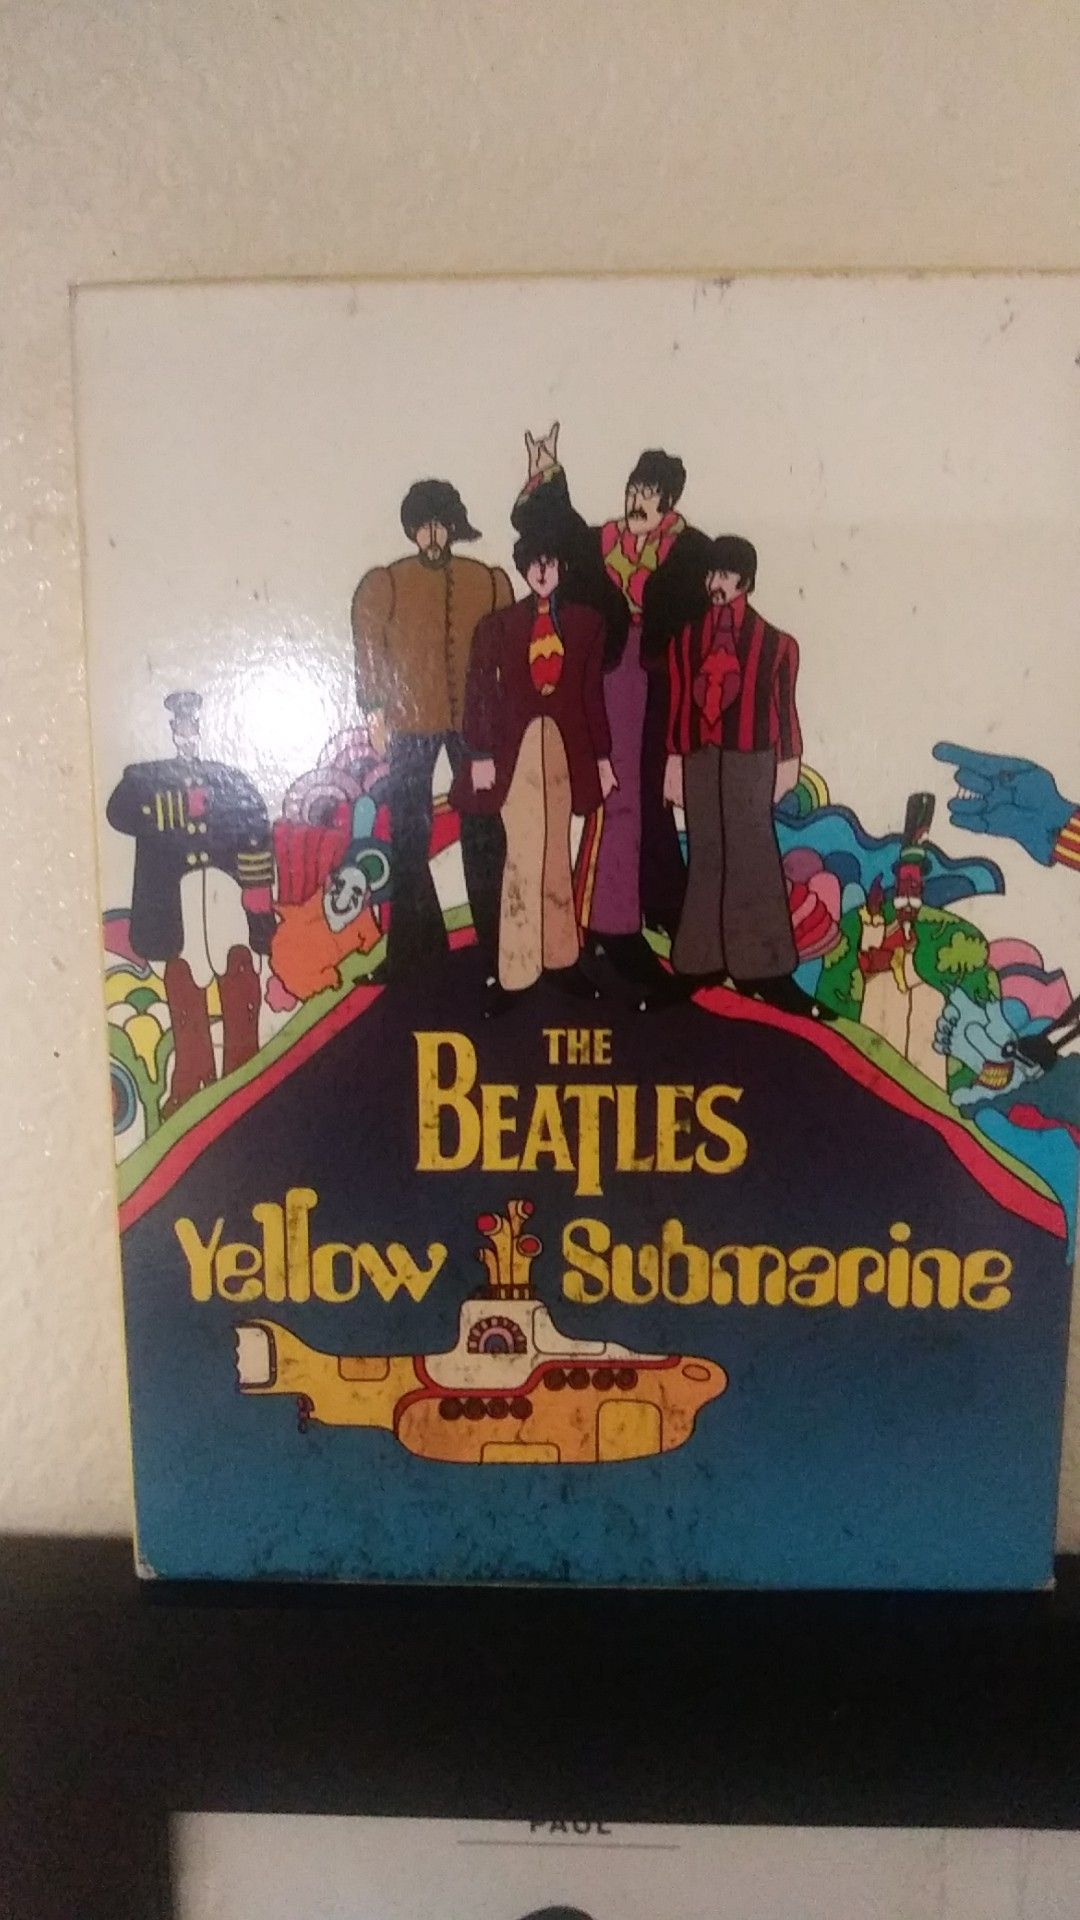 The Beatles Yellow Submarine Limited Edition DVD